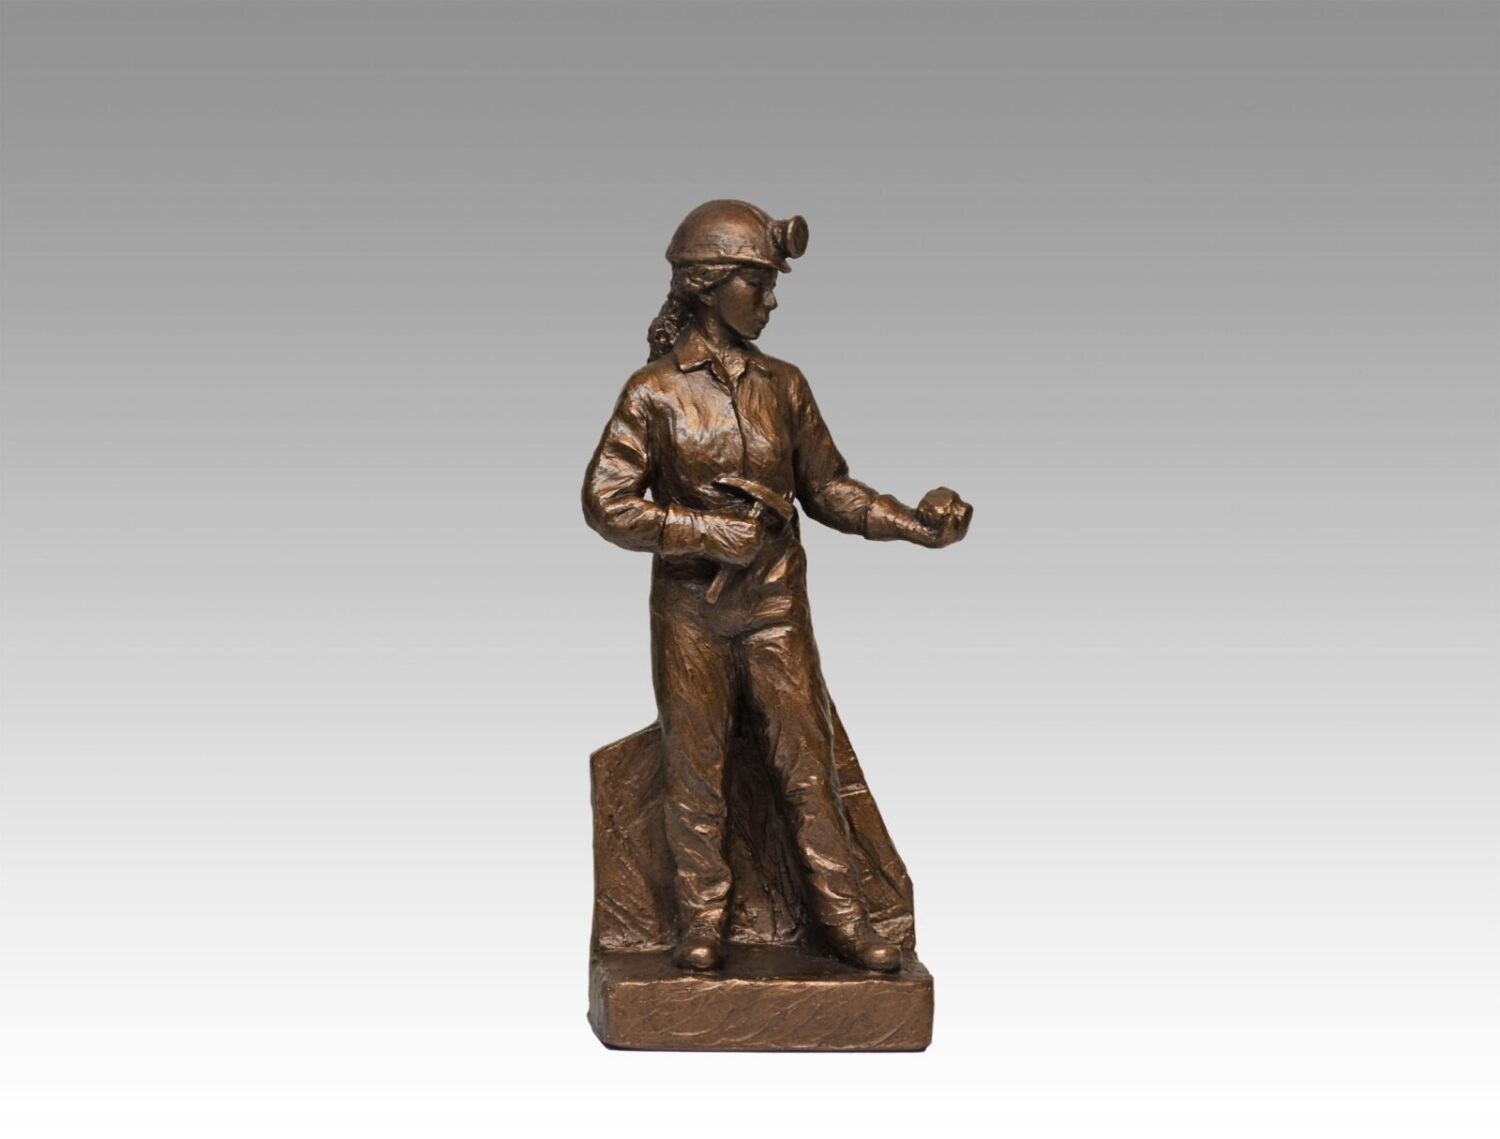 Gallery, Chipping Away, $225 CAD, Metal Infused, 10” H, Edition 80, Mining Sculpture of a Woman Miner holding a chipping hammer and rock with headframe in back, Sculptor Tyler Fauvelle